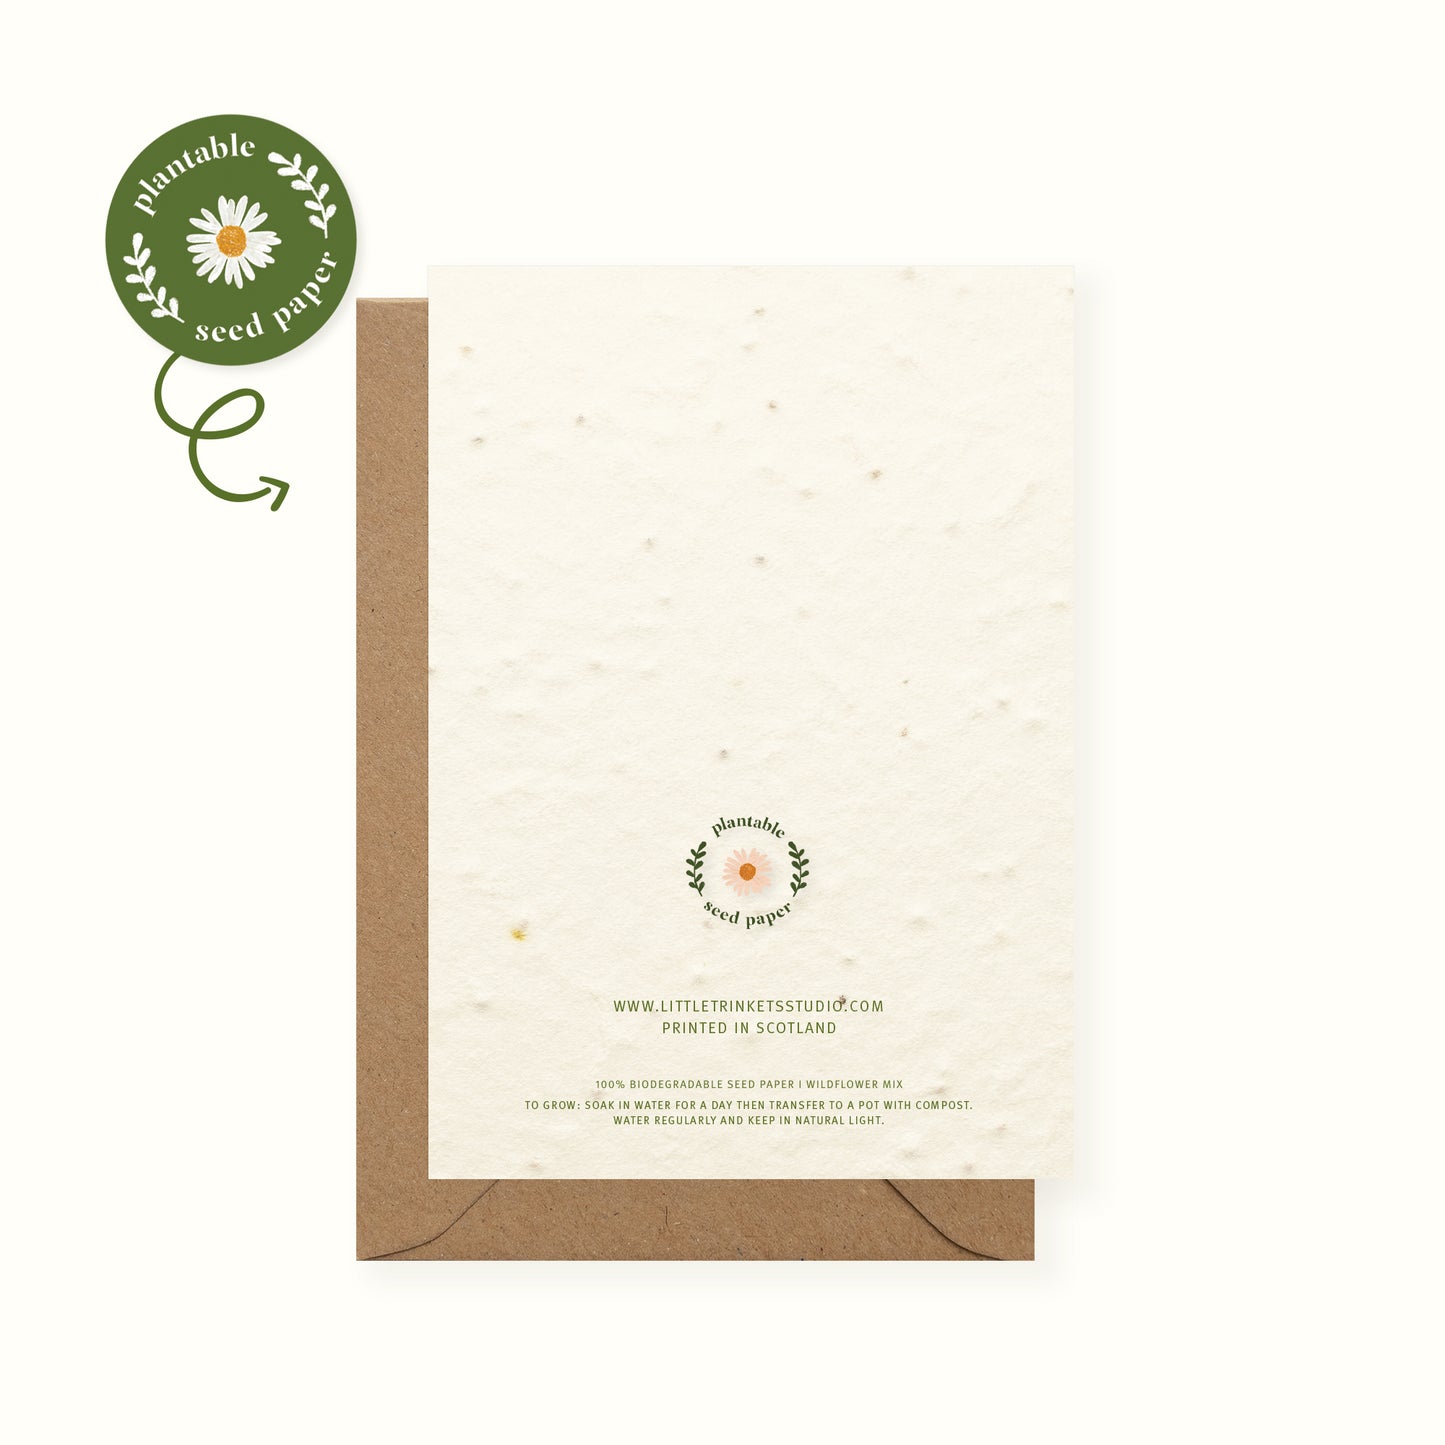 Floral Plantable Thank You Card